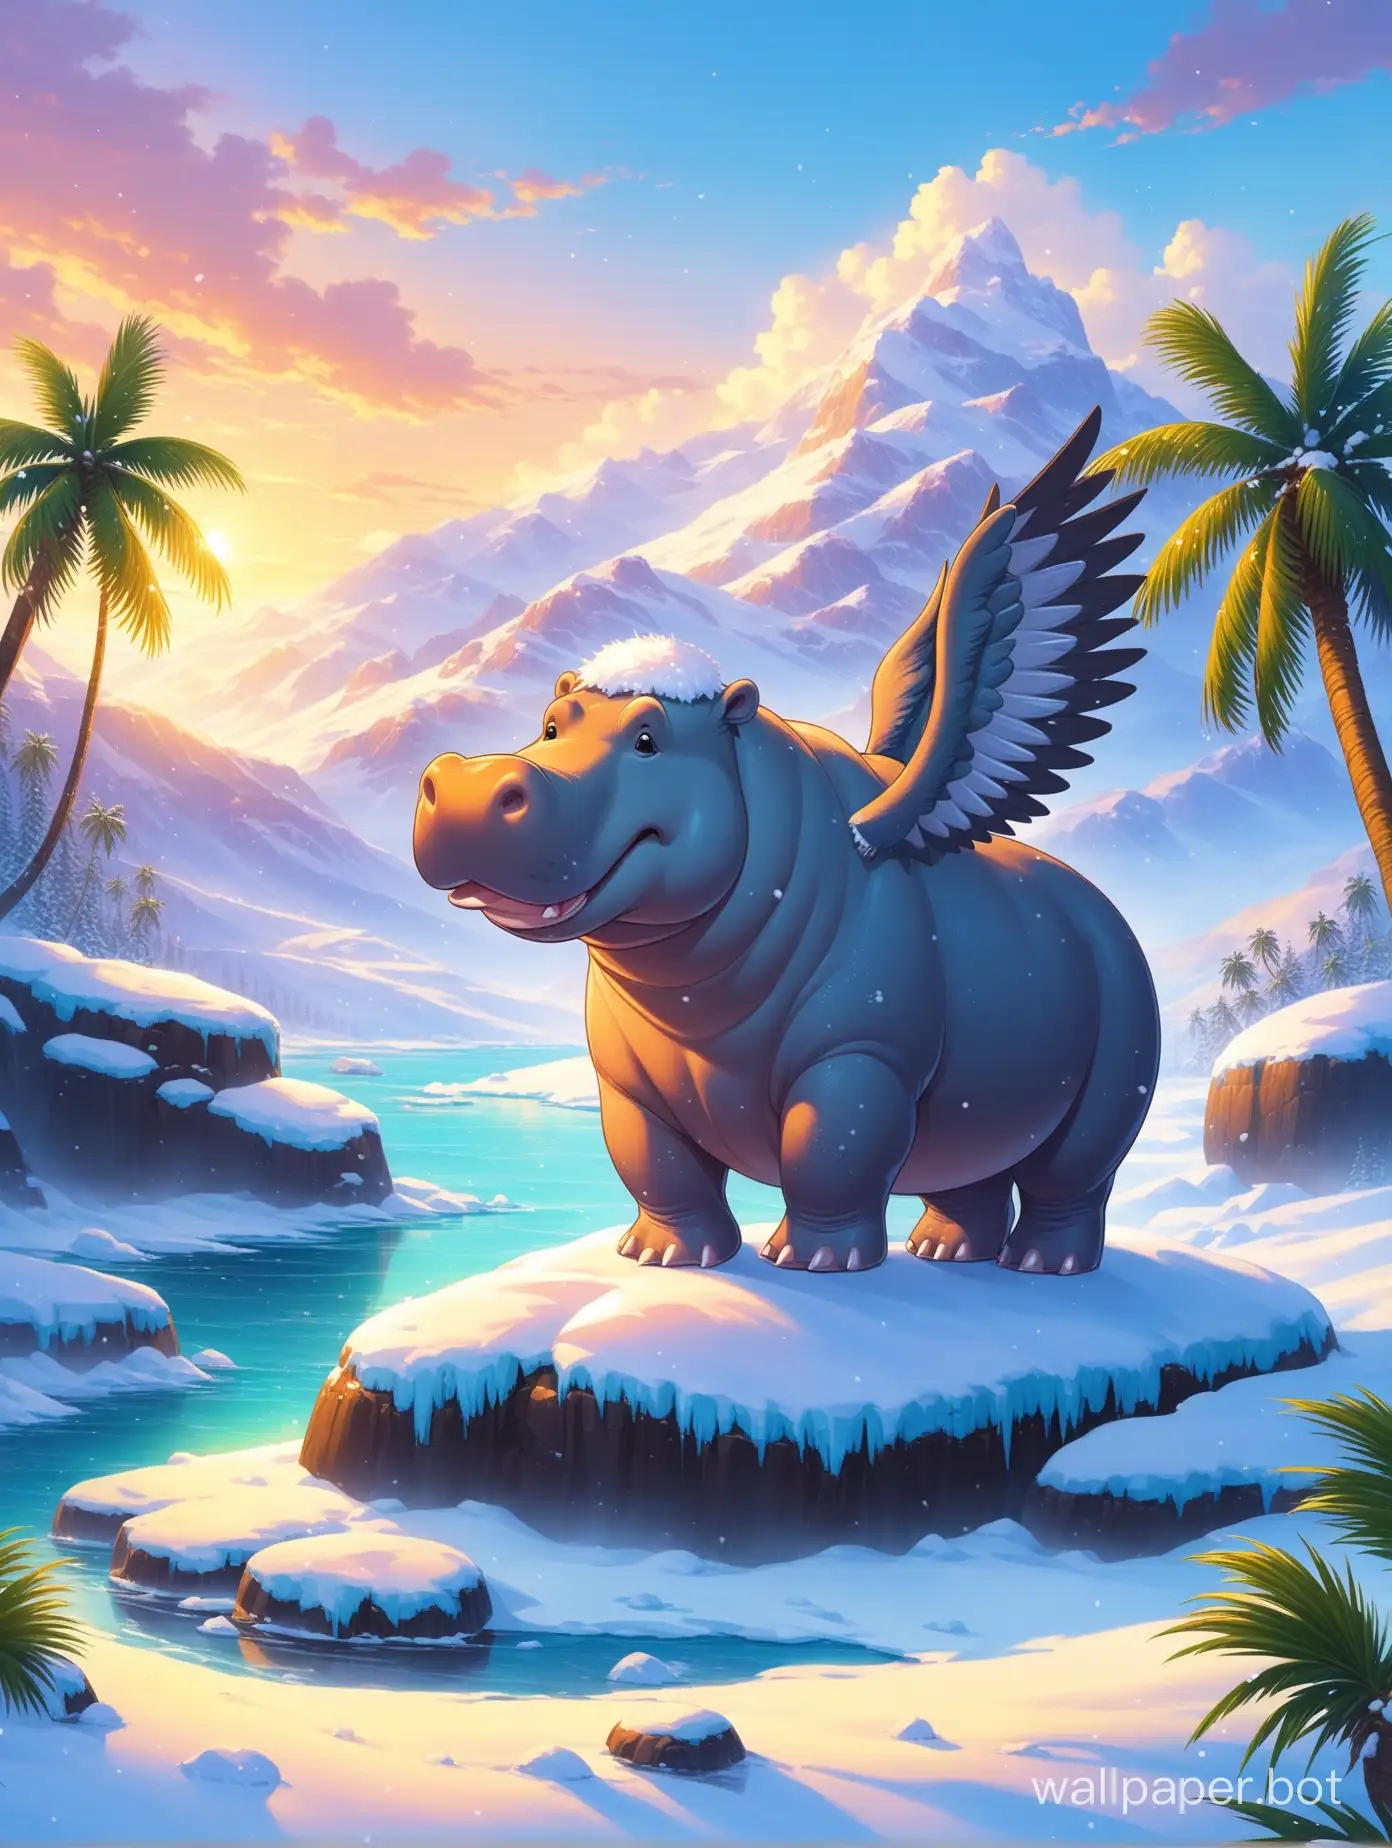 Flying-Hippopotamus-Among-SnowCovered-Rocks-and-Coconut-Palms